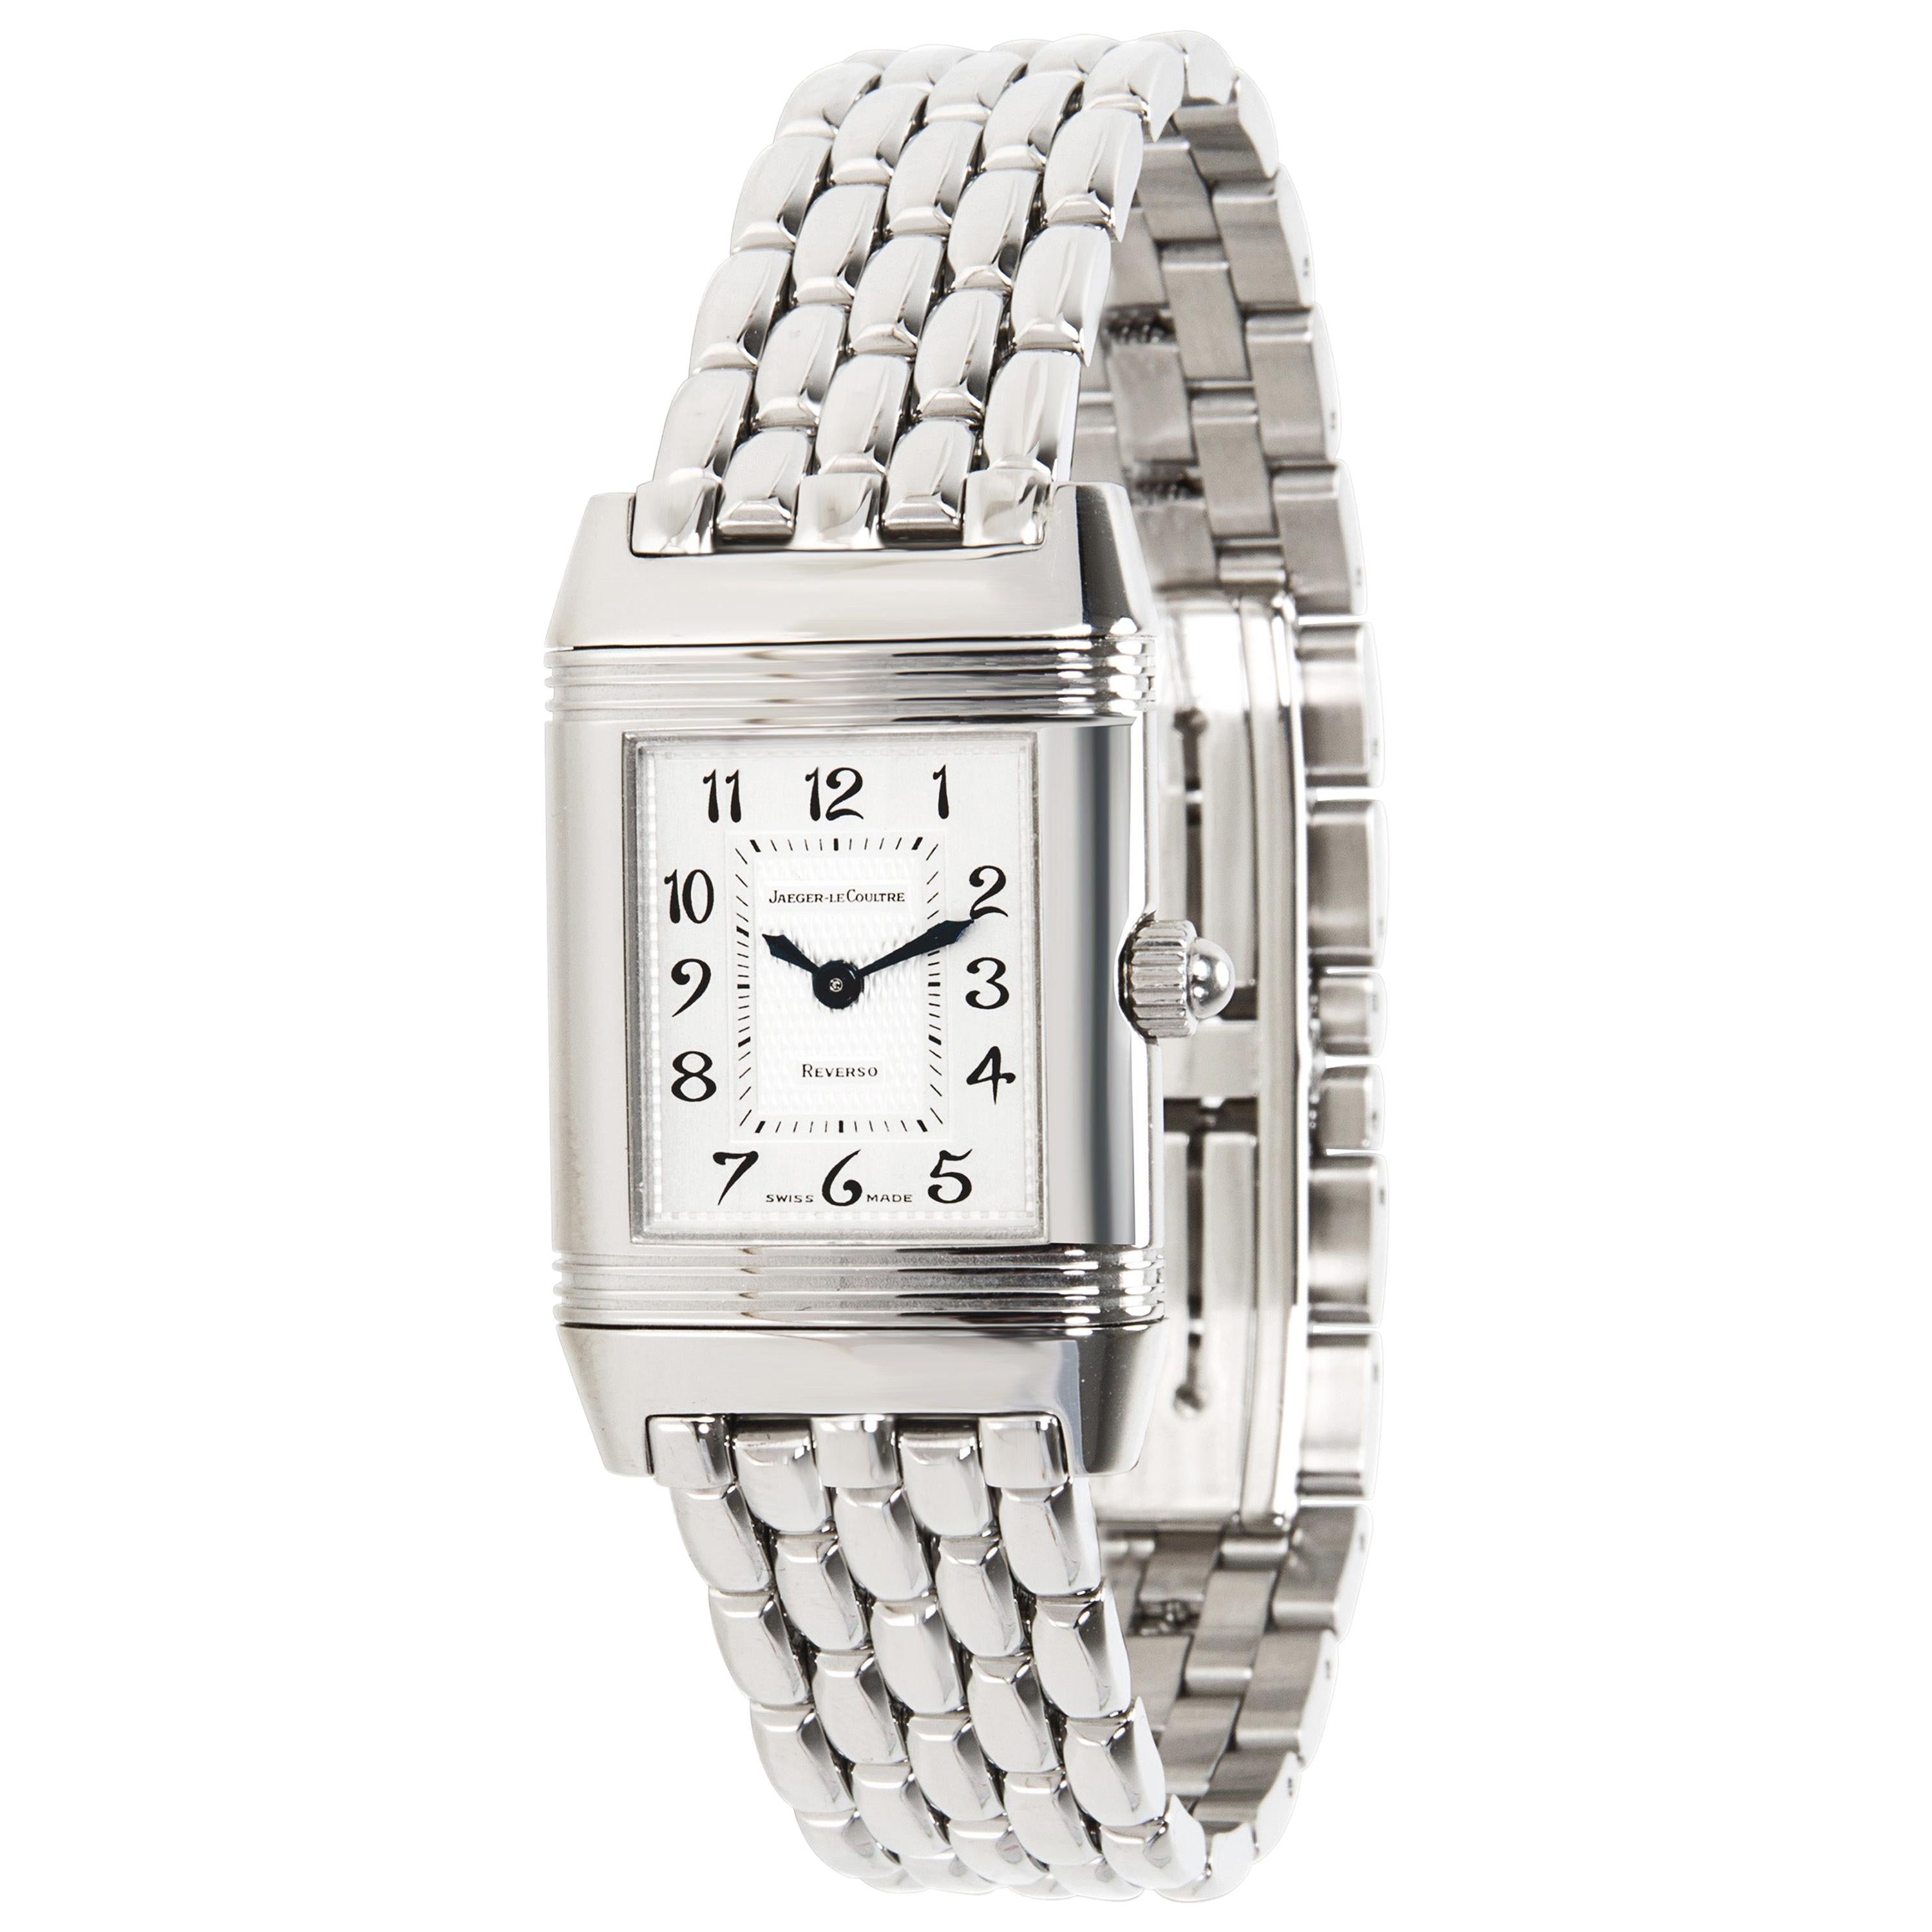 Jaeger-LeCoultre Duetto 266.8.44 Women's Watch in Stainless Steel